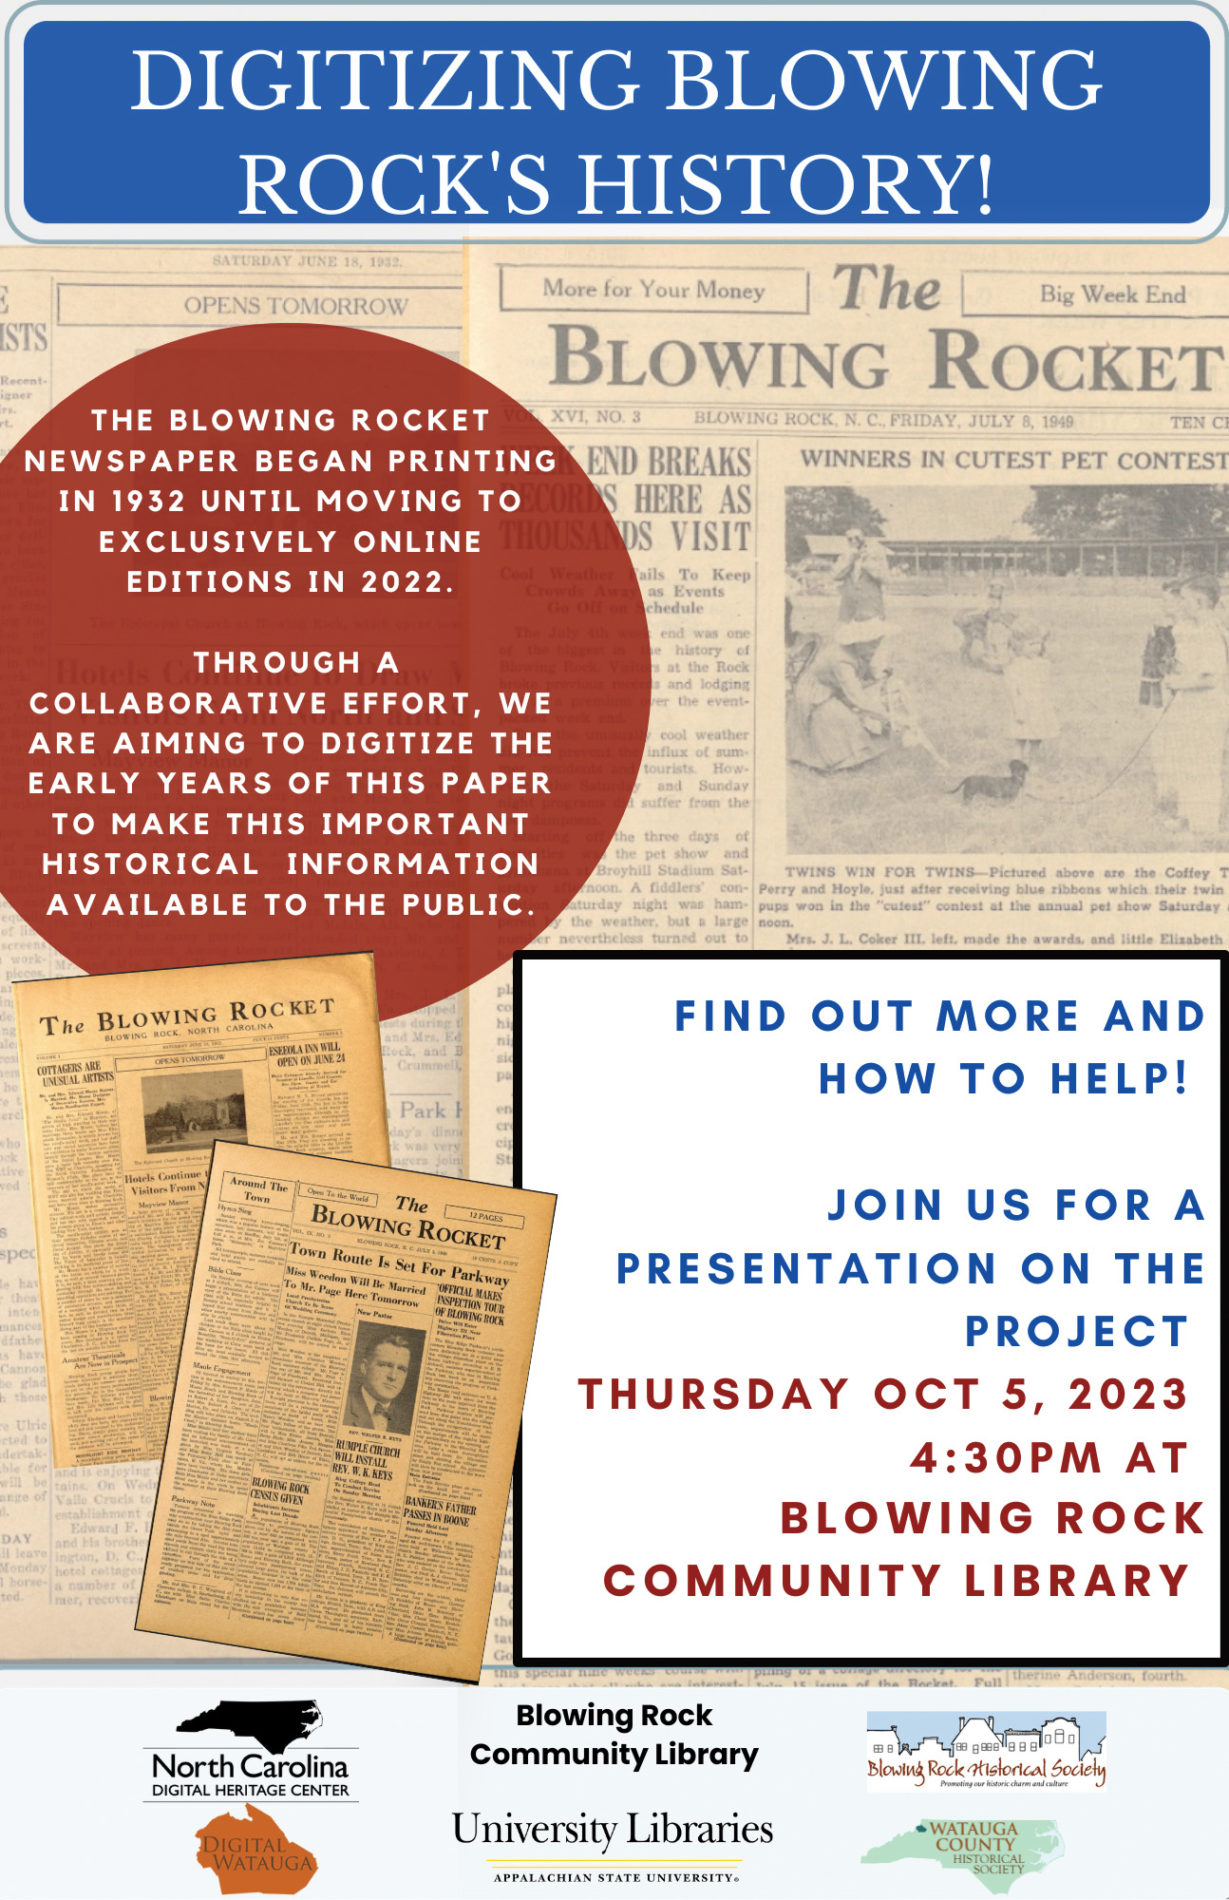 Digitizing Blowing Rock’s History at the Blowing Rock Community Library